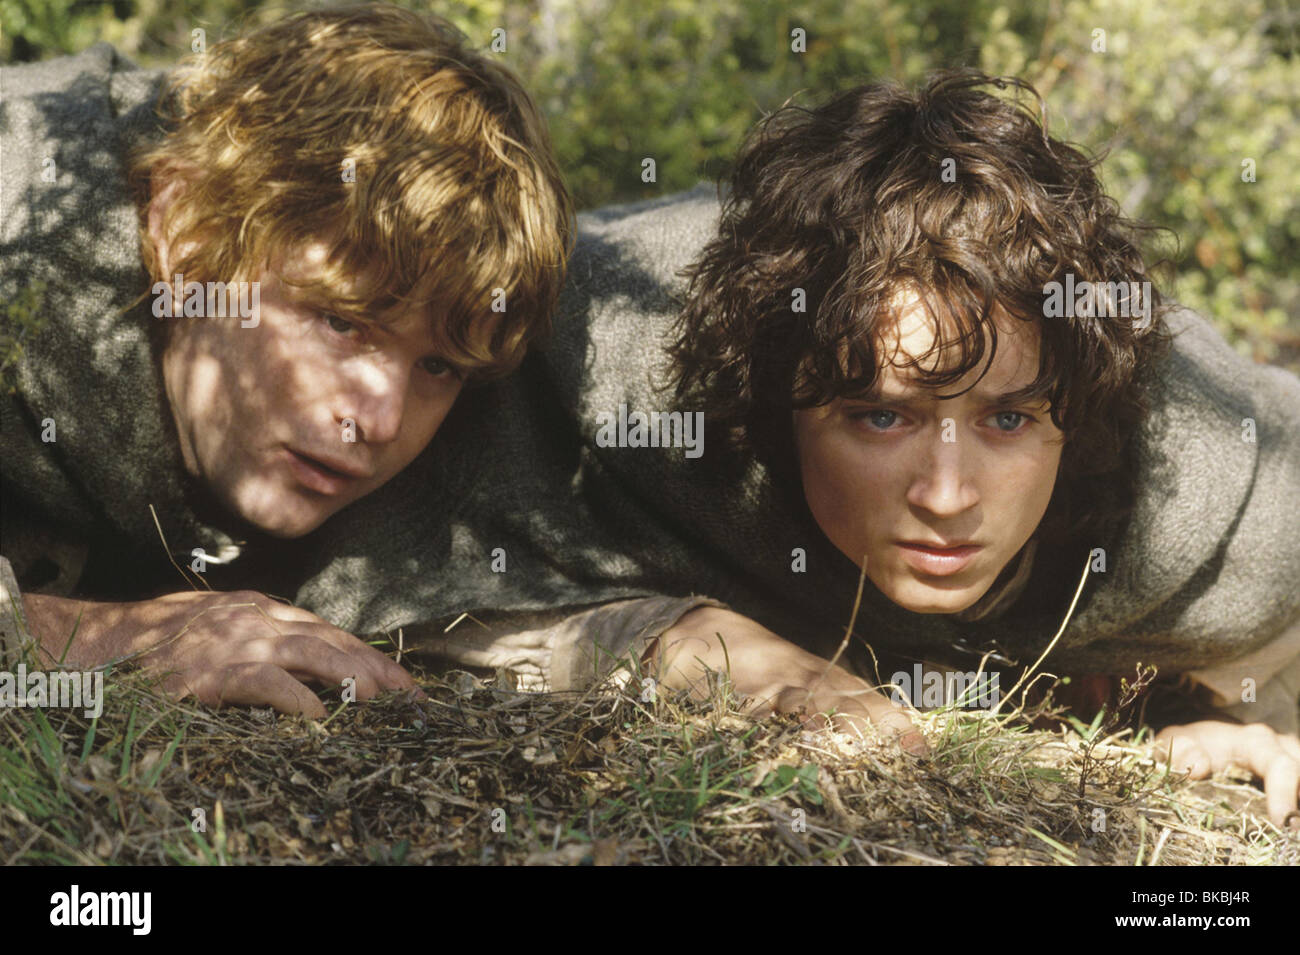 THE LORD OF THE RINGS: THE TWO TOWERS (2002) SEAN ASTIN, SAM GAMGEE, ELIJAH WOOD, FRODO BAGGINS TWRS 001 10 Stock Photo